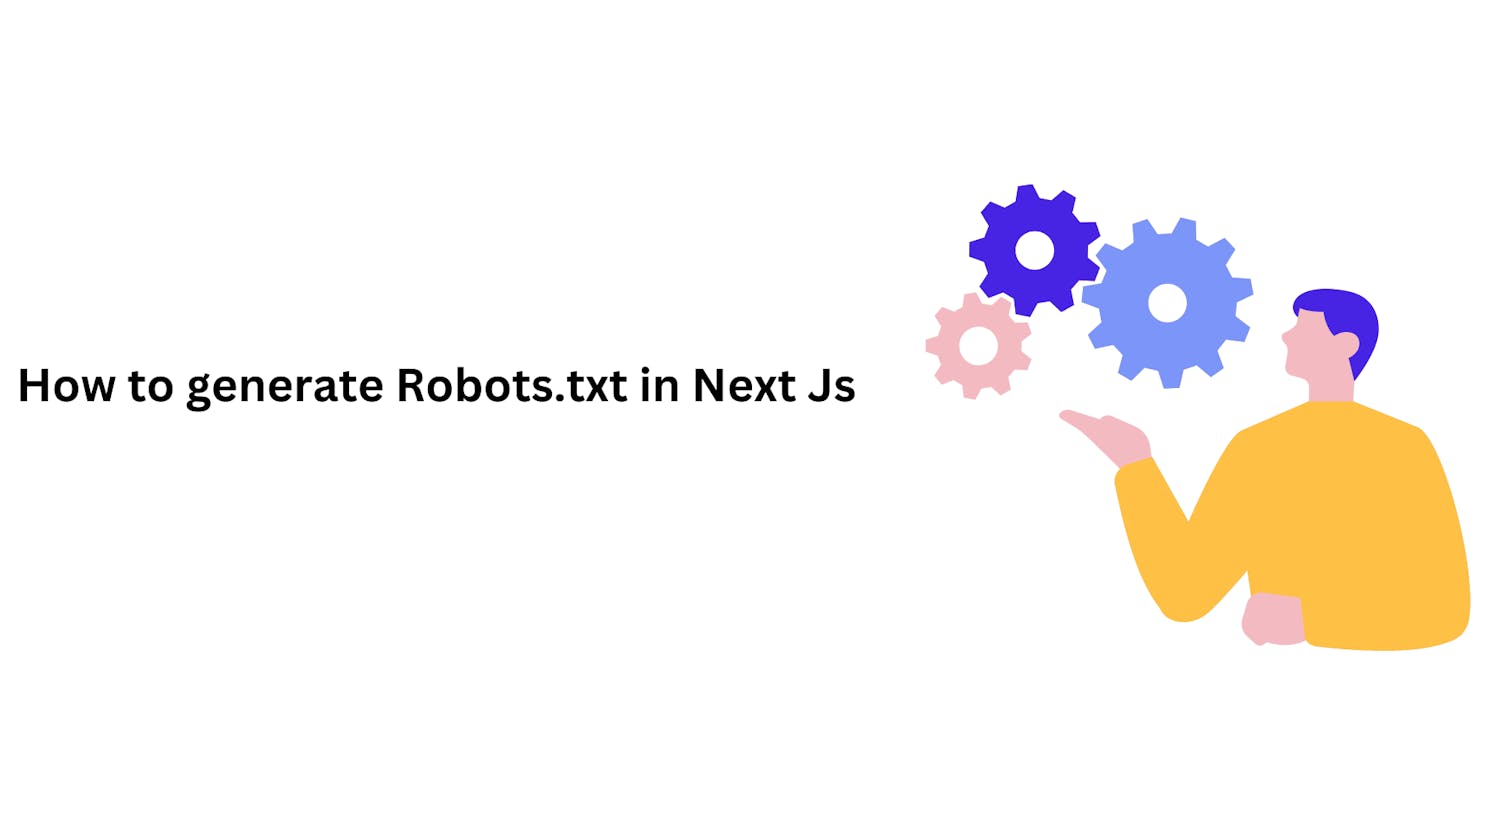 How to generate Robots.txt in Next Js